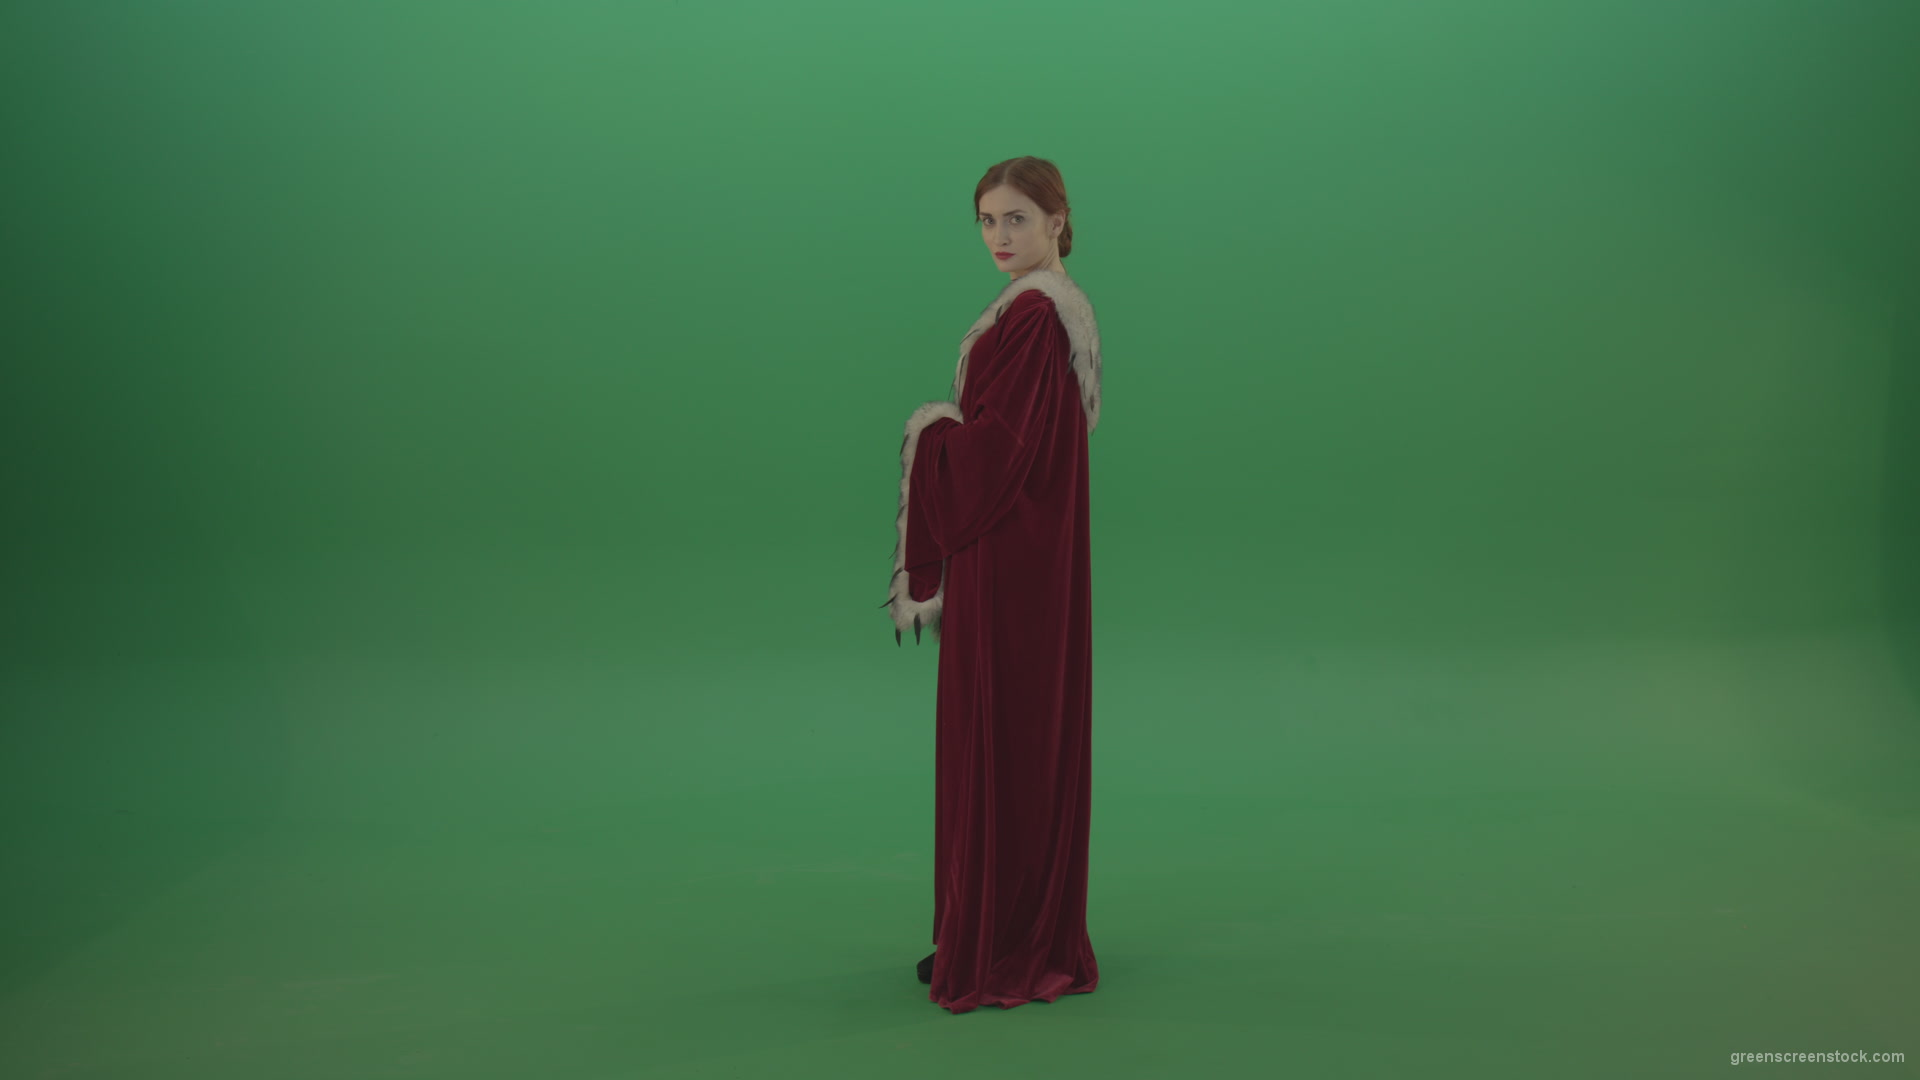 Elegant-woman-princess-with-light-movements-shows-her-beauty-dressed-in-red-cloak-on-a-green-background_007 Green Screen Stock